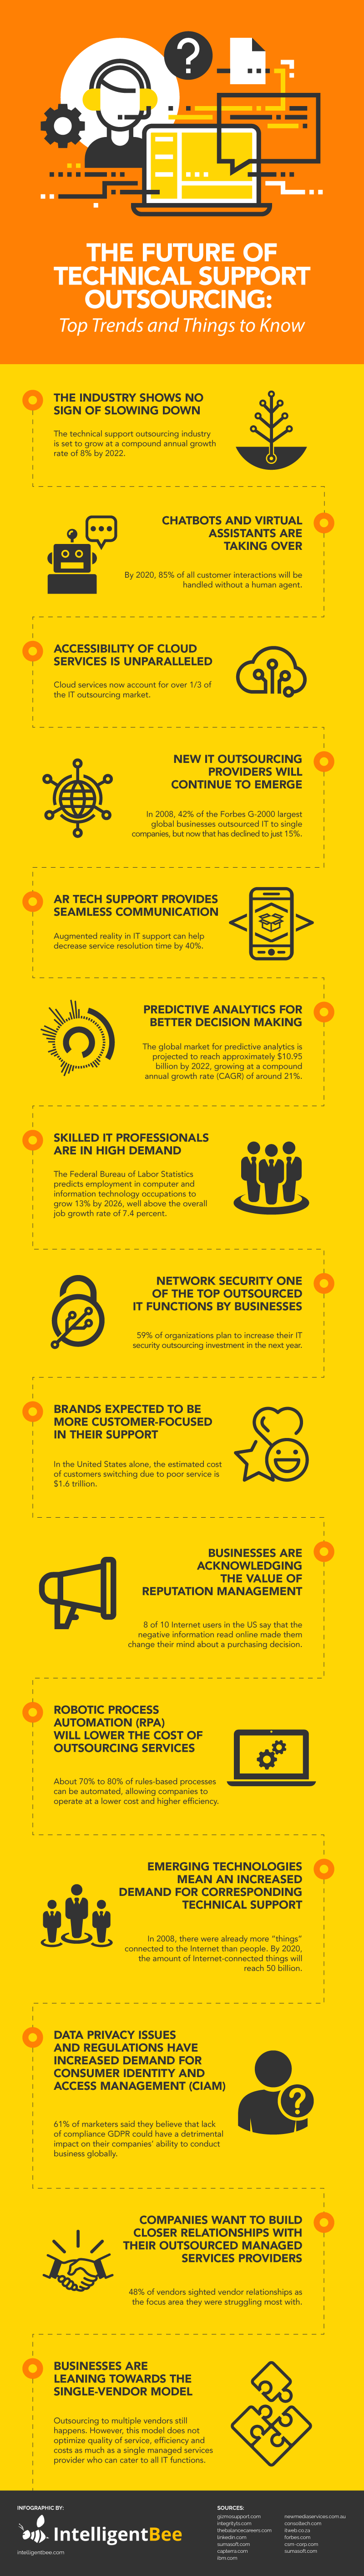 The-Future-Of-Technical-Support-Outsourcing-Infographic